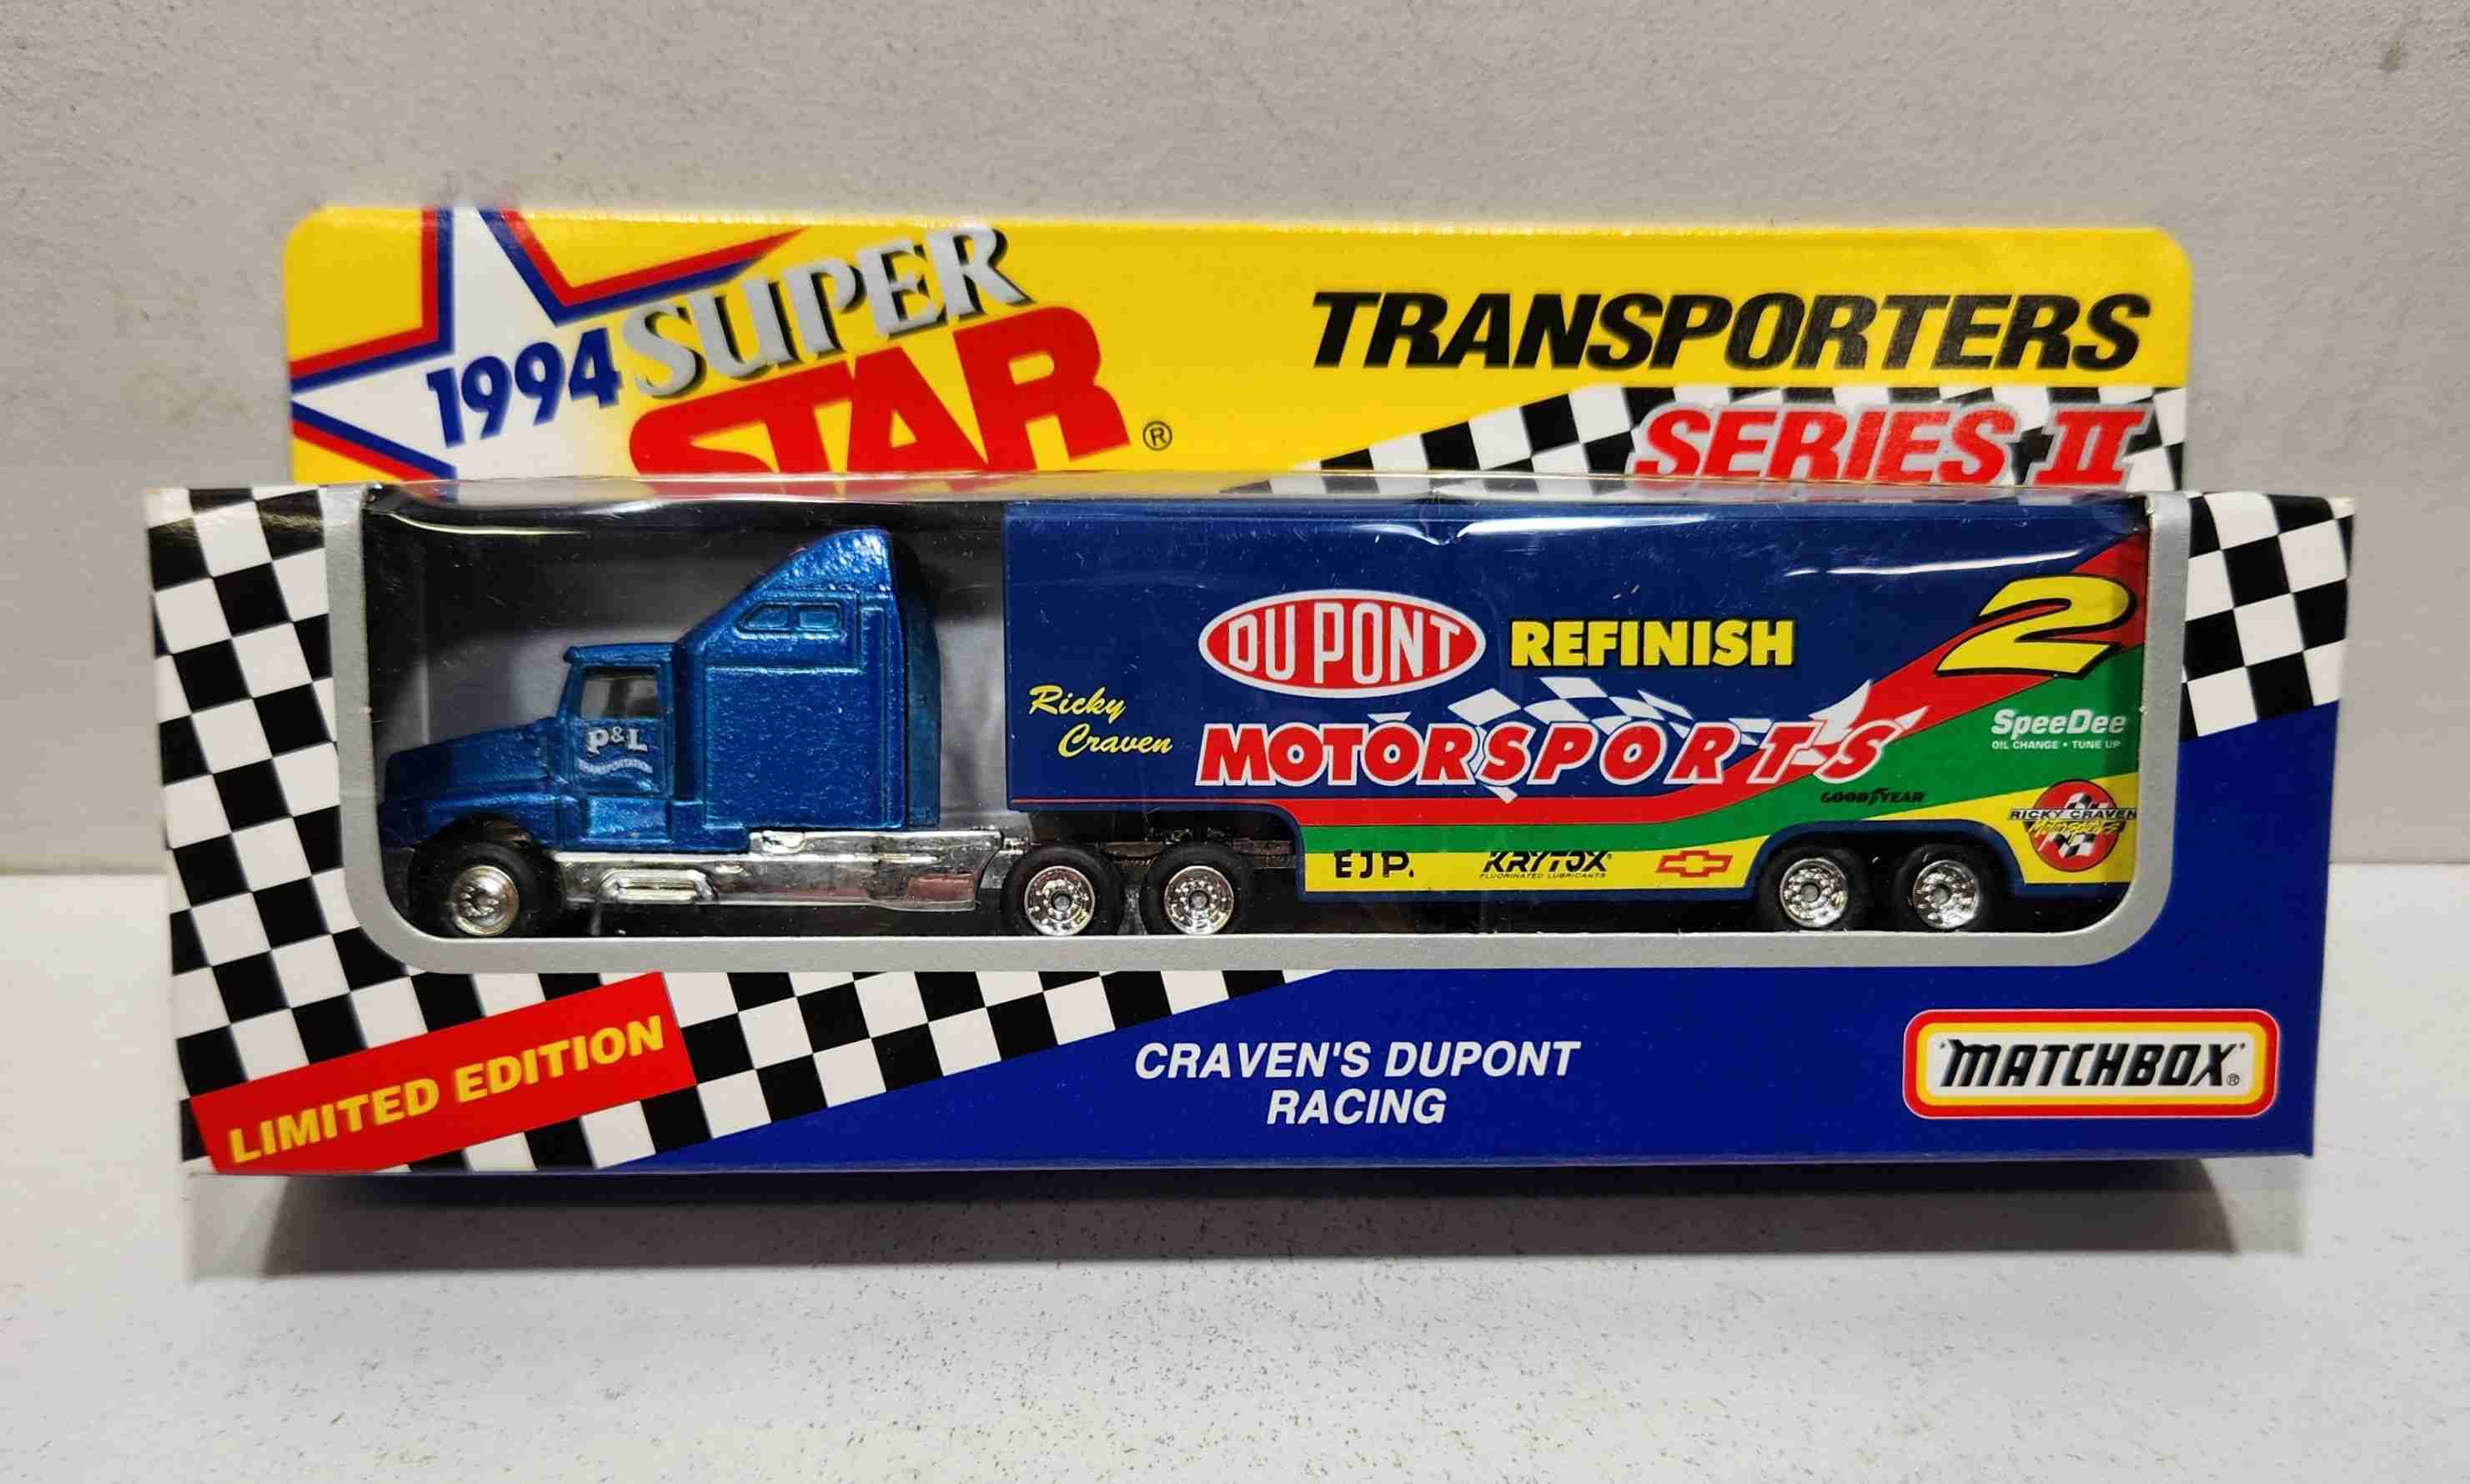 1994 Ricky Craven 1/80th Dupont Refresh "Busch Series" Transporter